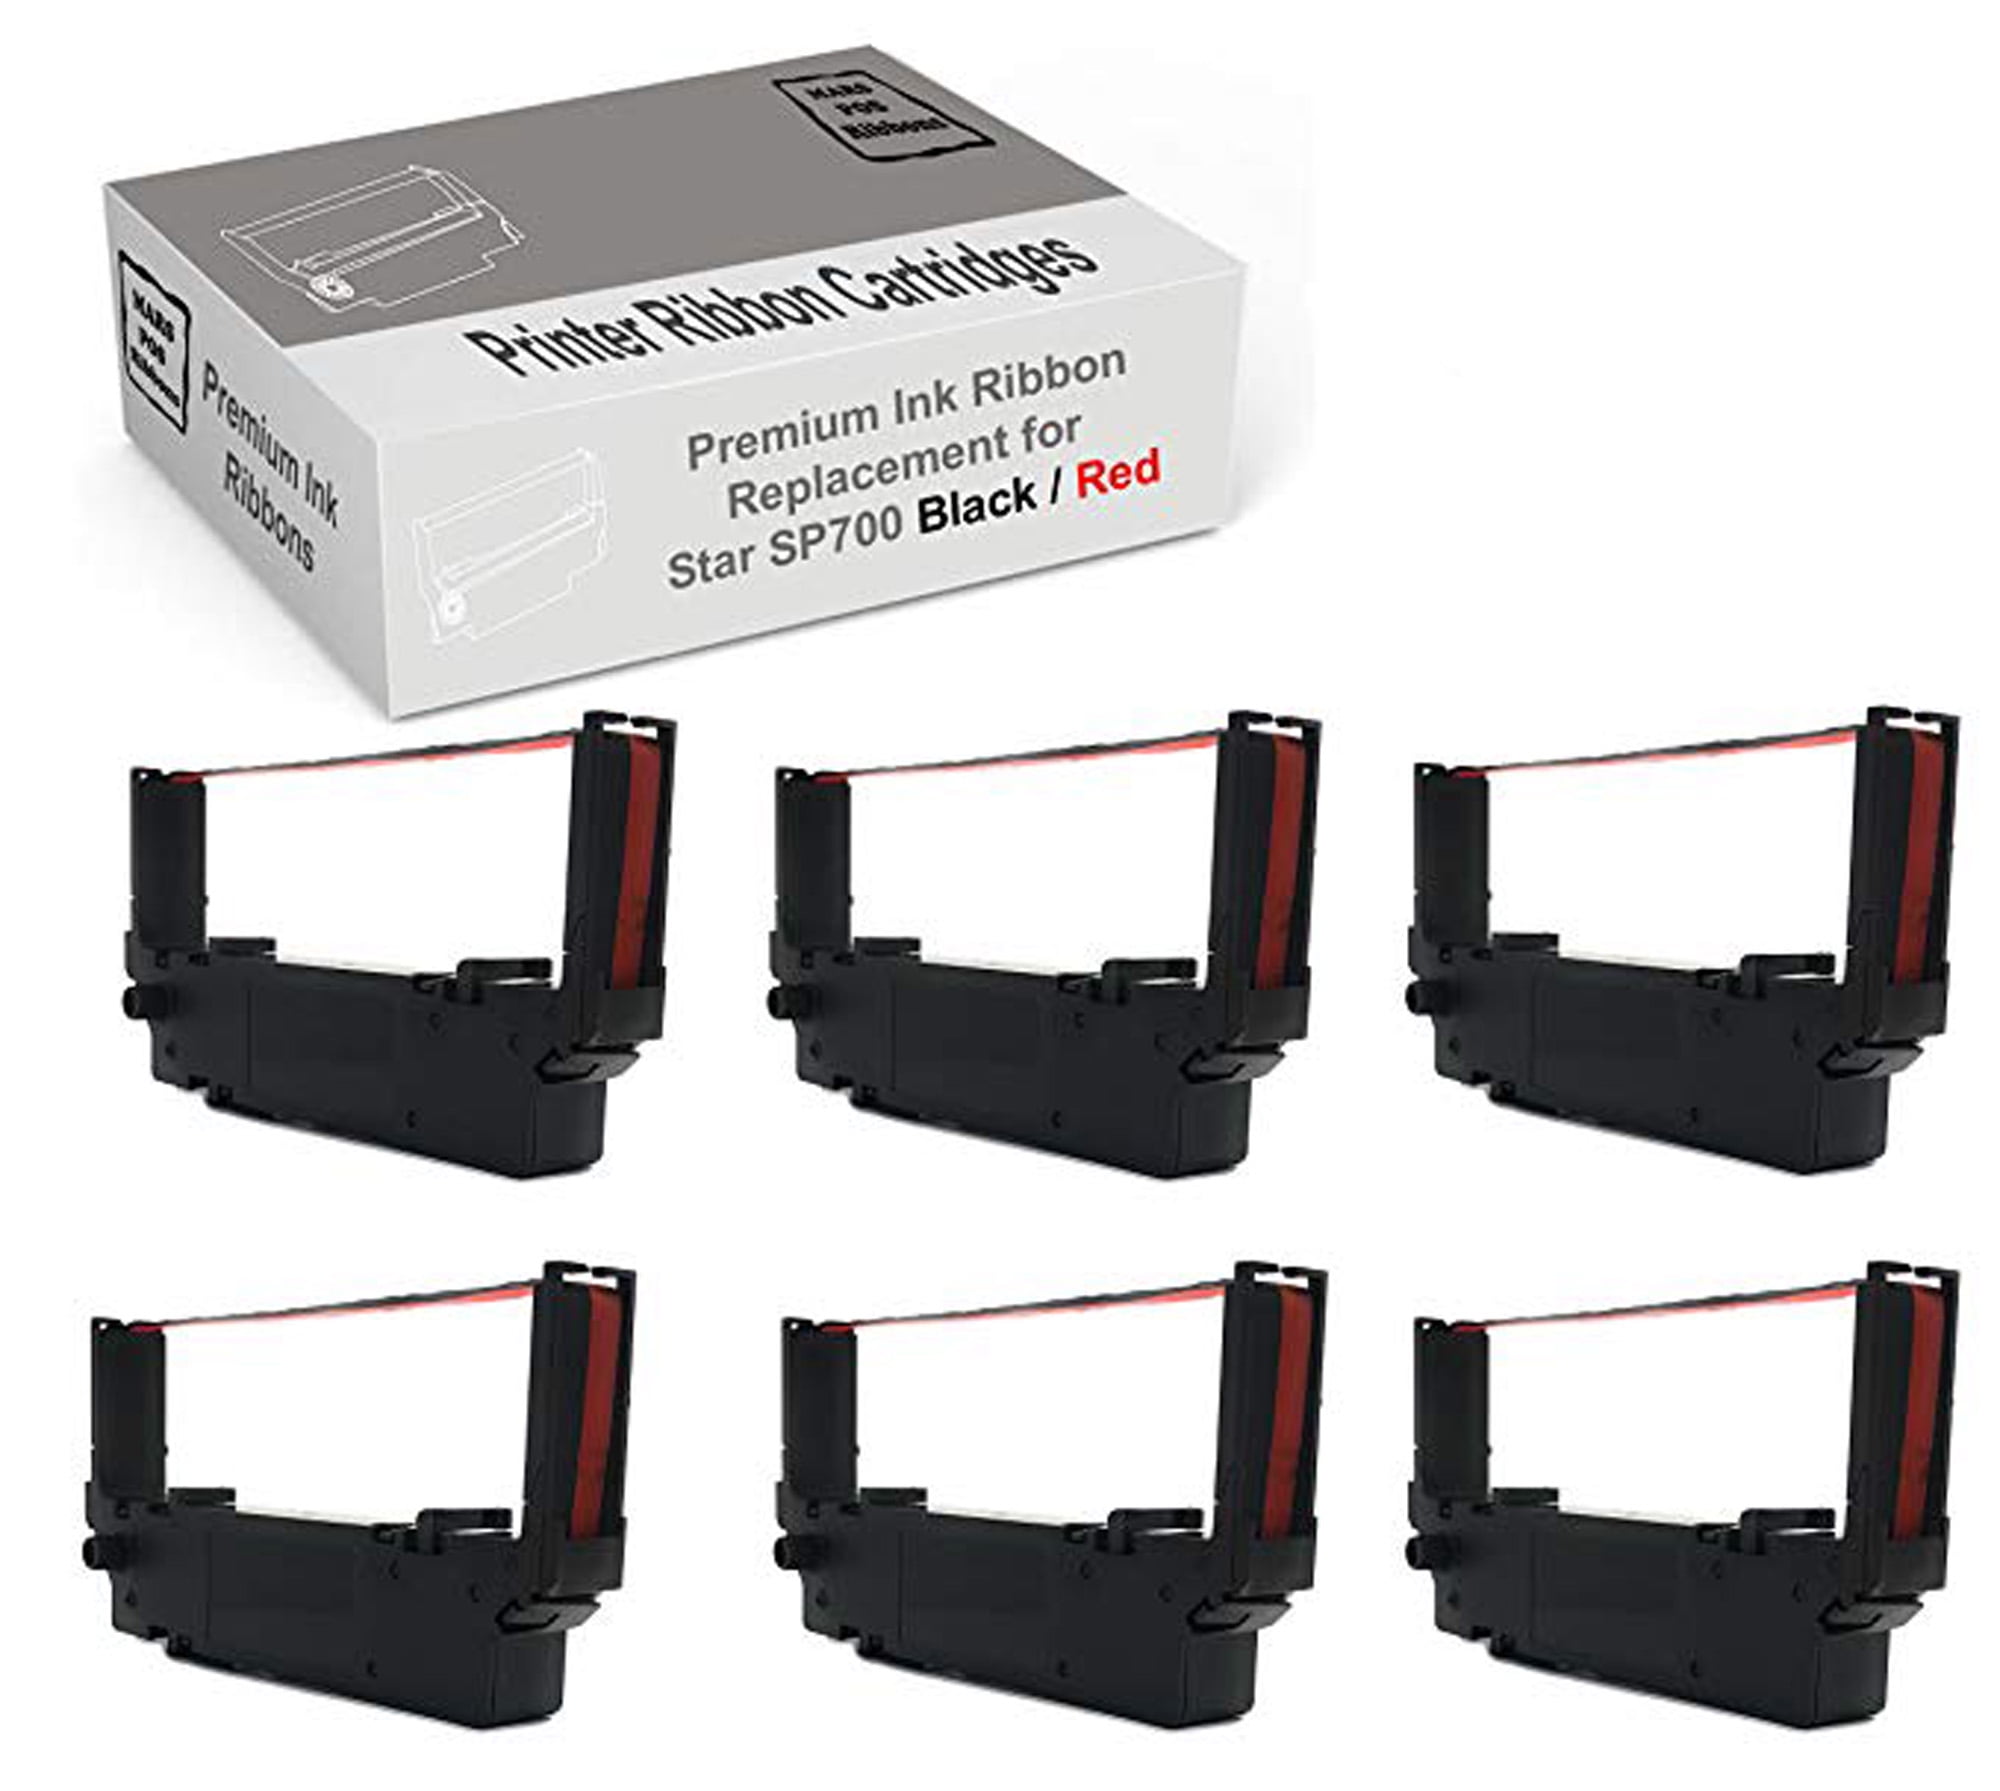 72 NEW STAR SP 700 BLACK & RED INK PRINTER RIBBONS  ~FREE SHIPPING~ 